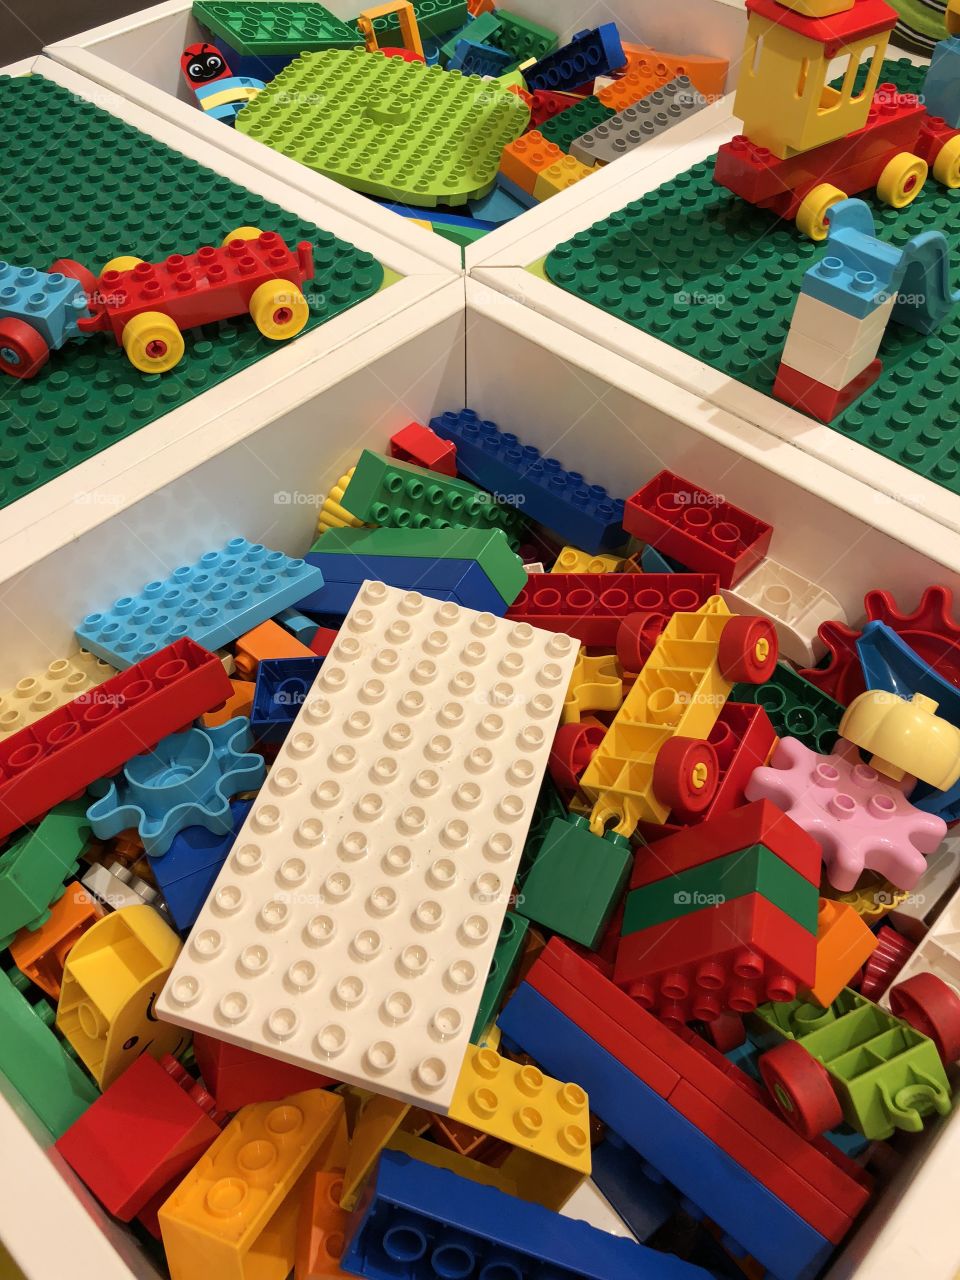 LEGO pieces in white containers